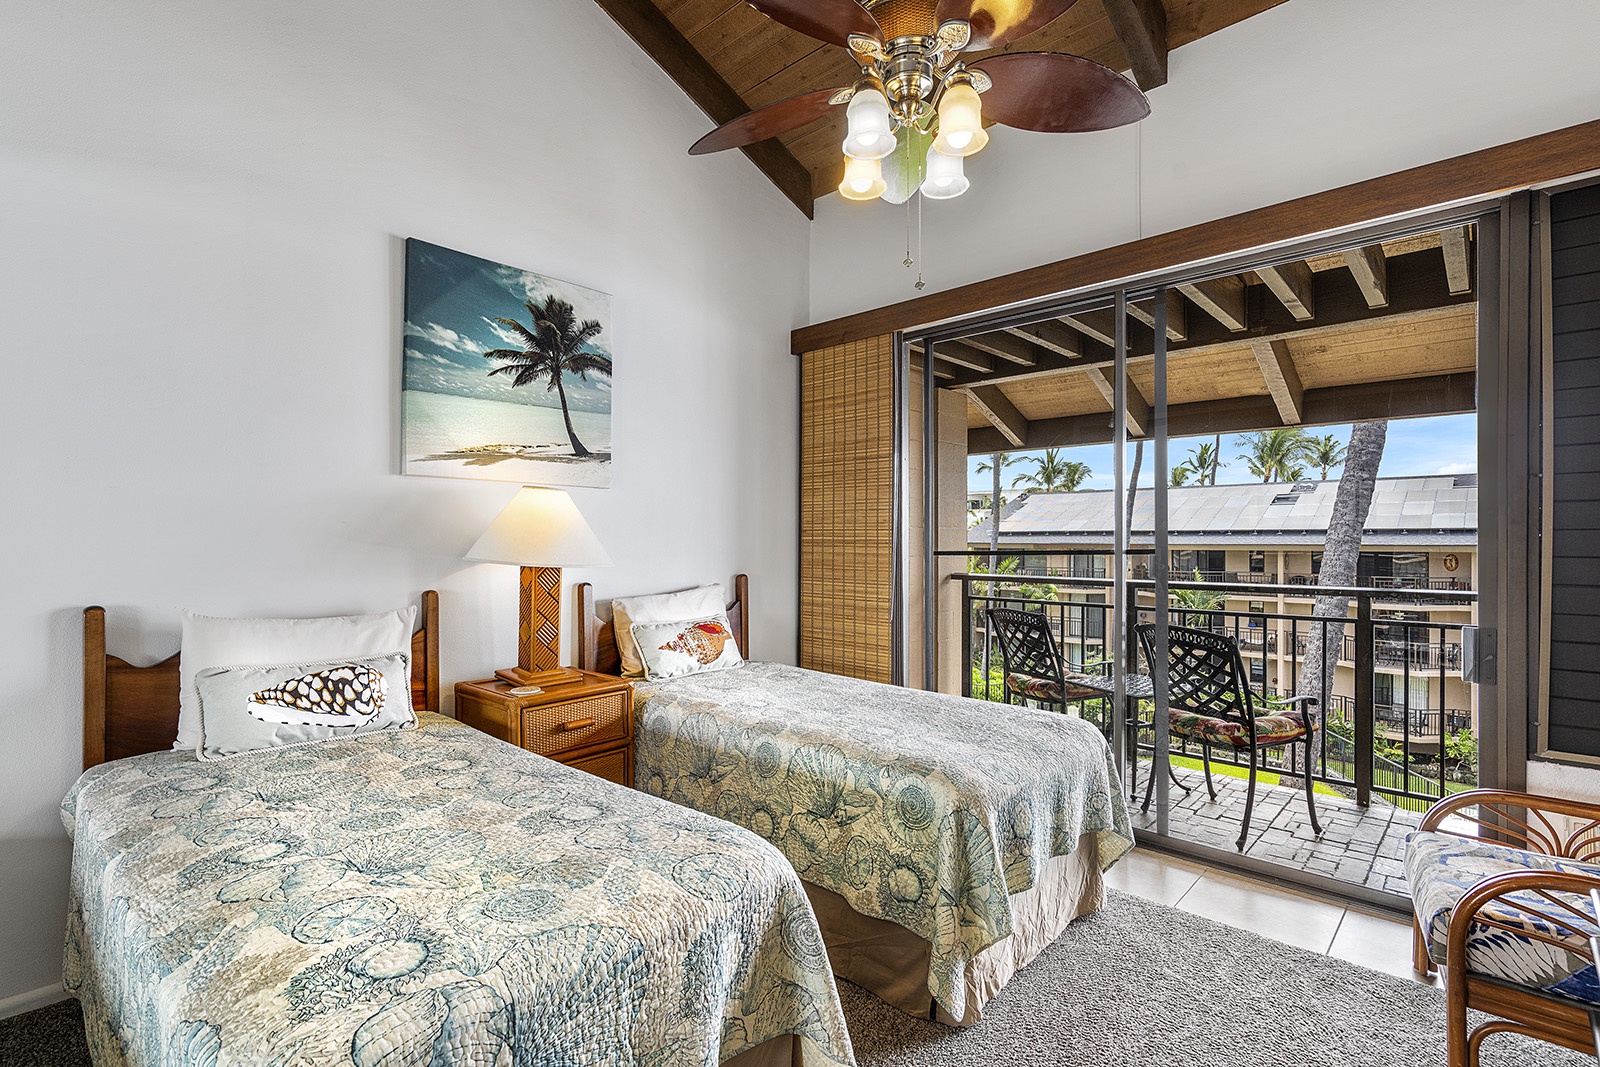 Kailua Kona Vacation Rentals, Kona Makai 6301 - Guest bedroom with 2 Twin beds that can be combined to form a King!